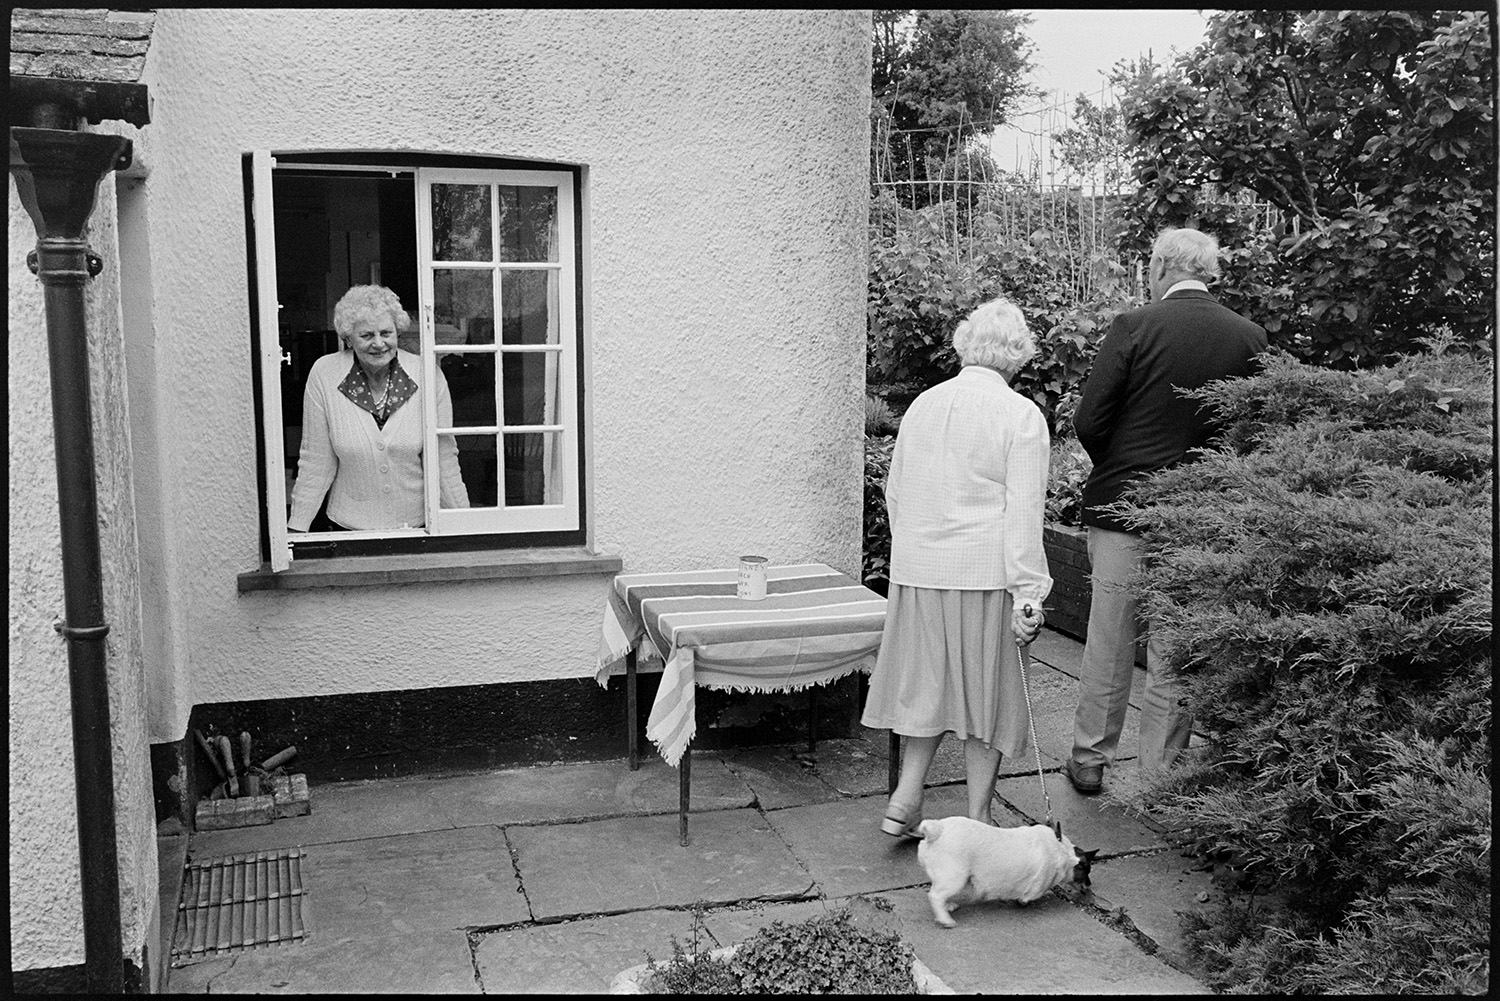 Open garden, with cake stall and people looking around garden. Thatched garage.
[Visitors at an open garden event at Highdown, Ashreigney. A man and a woman with a small dog are walking around the garden path and a woman, possibly Moggie Dew, is looking out of a window. There is a small table with a tin can on it by the window.]